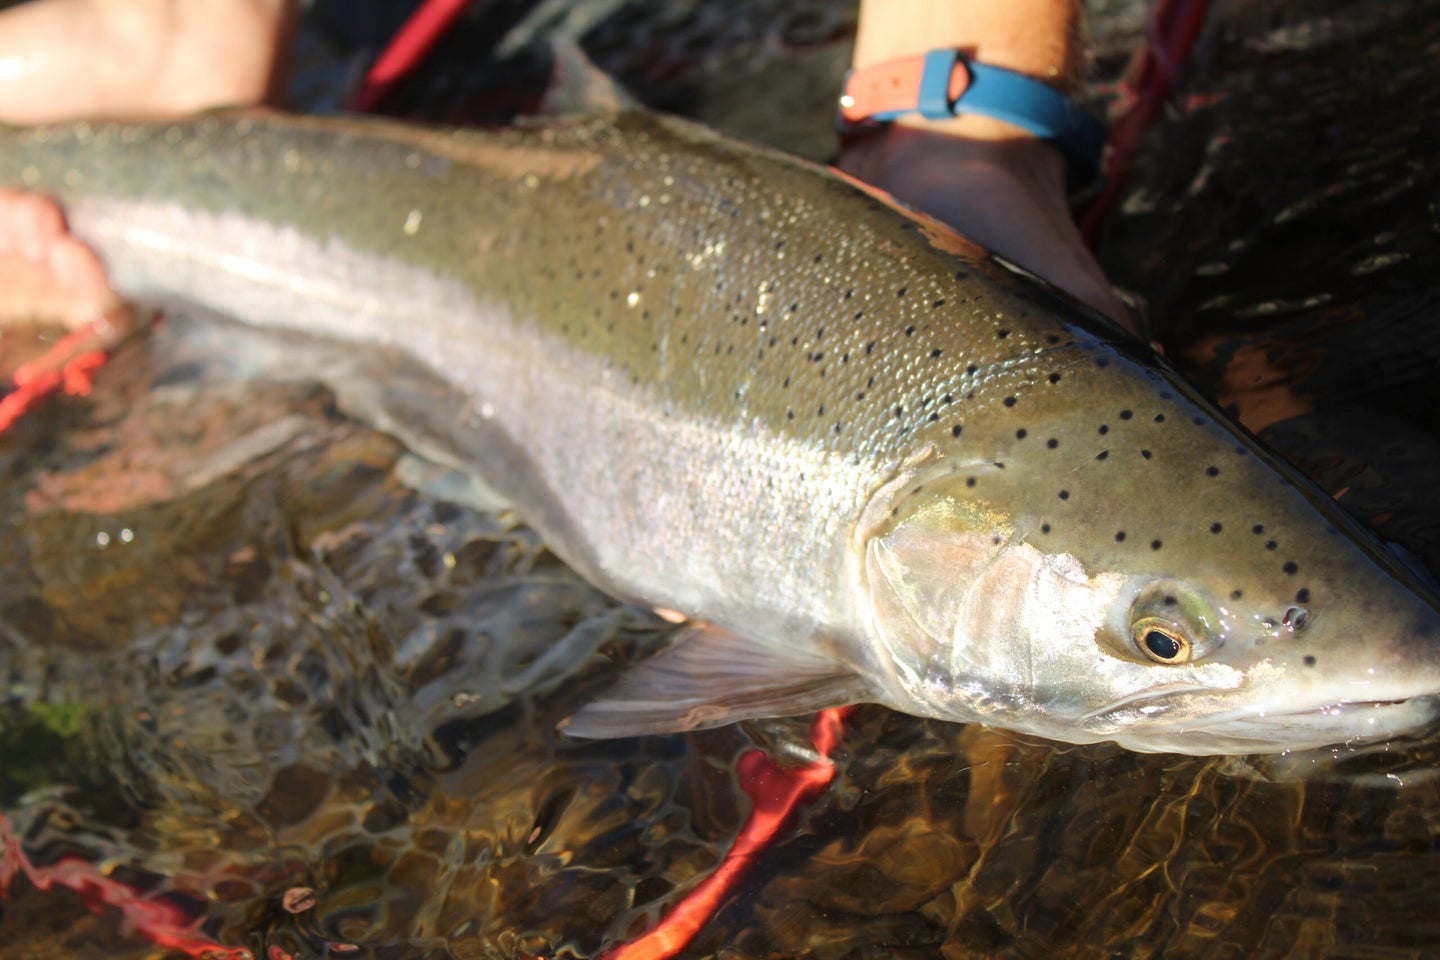 Angler holding a steelhead fish in the water.